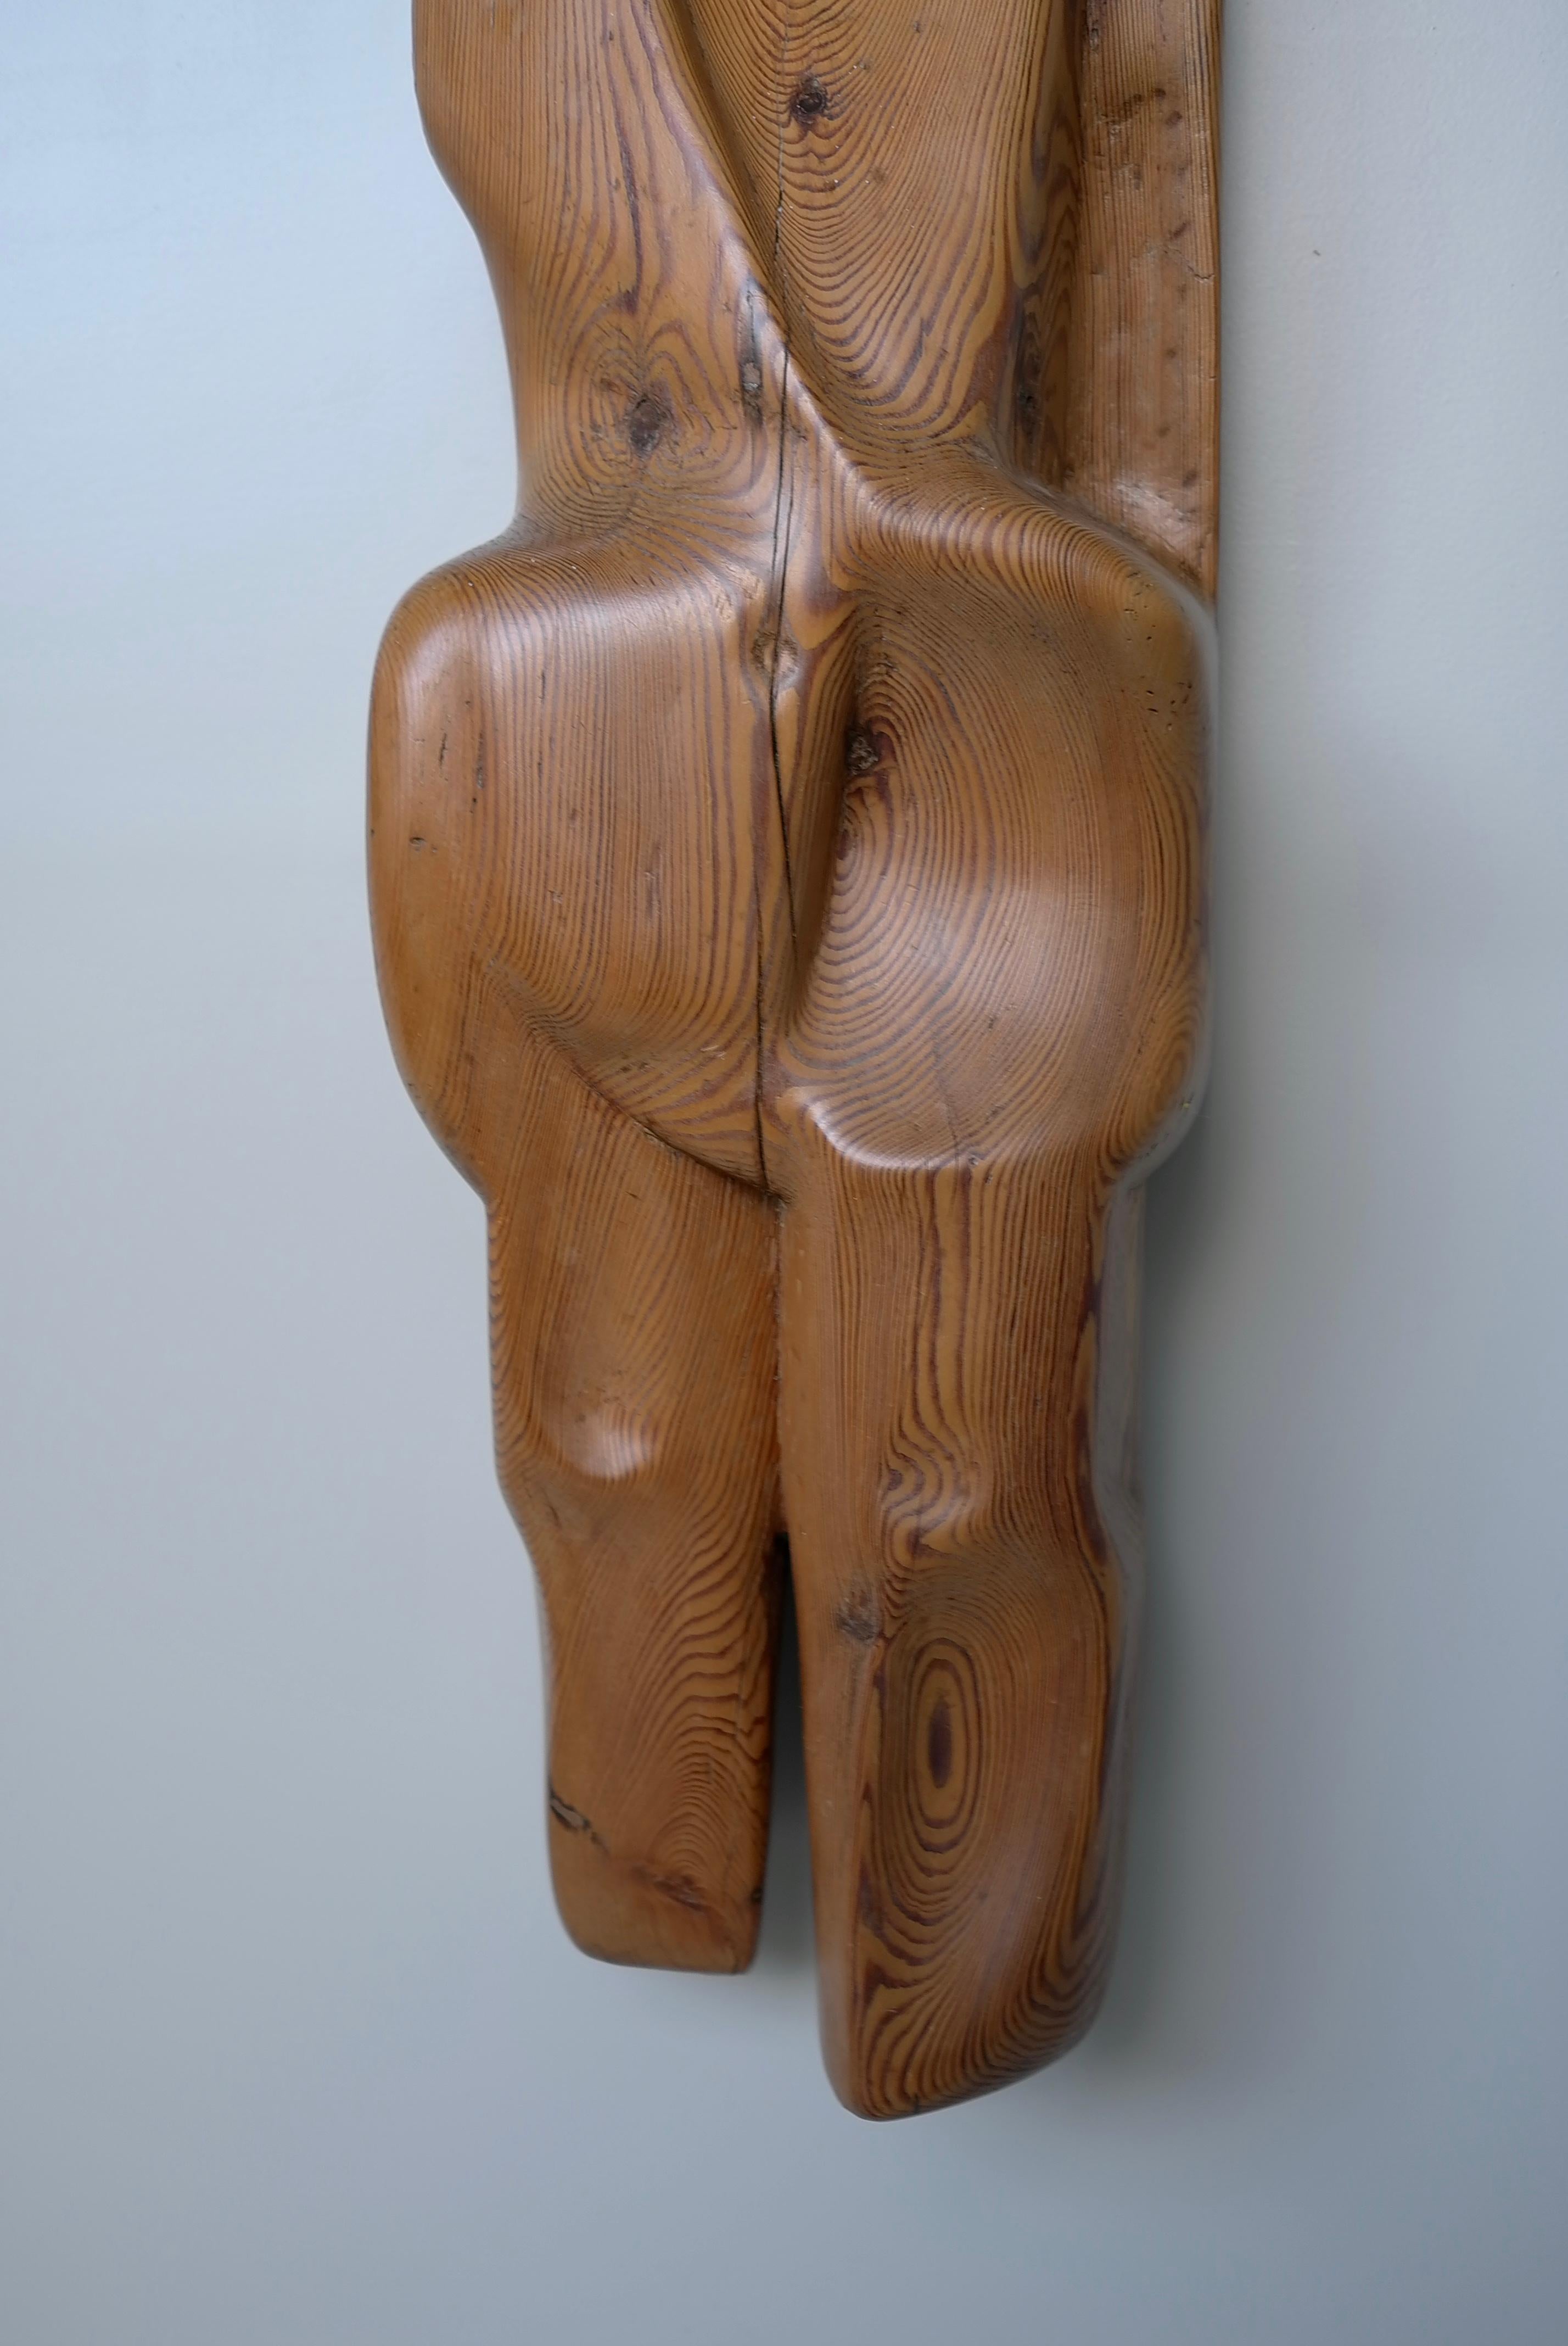 Pine Abstract Wooden Wall Art , Women Figure by Cor Dam, Delft The Netherlands 1958 For Sale